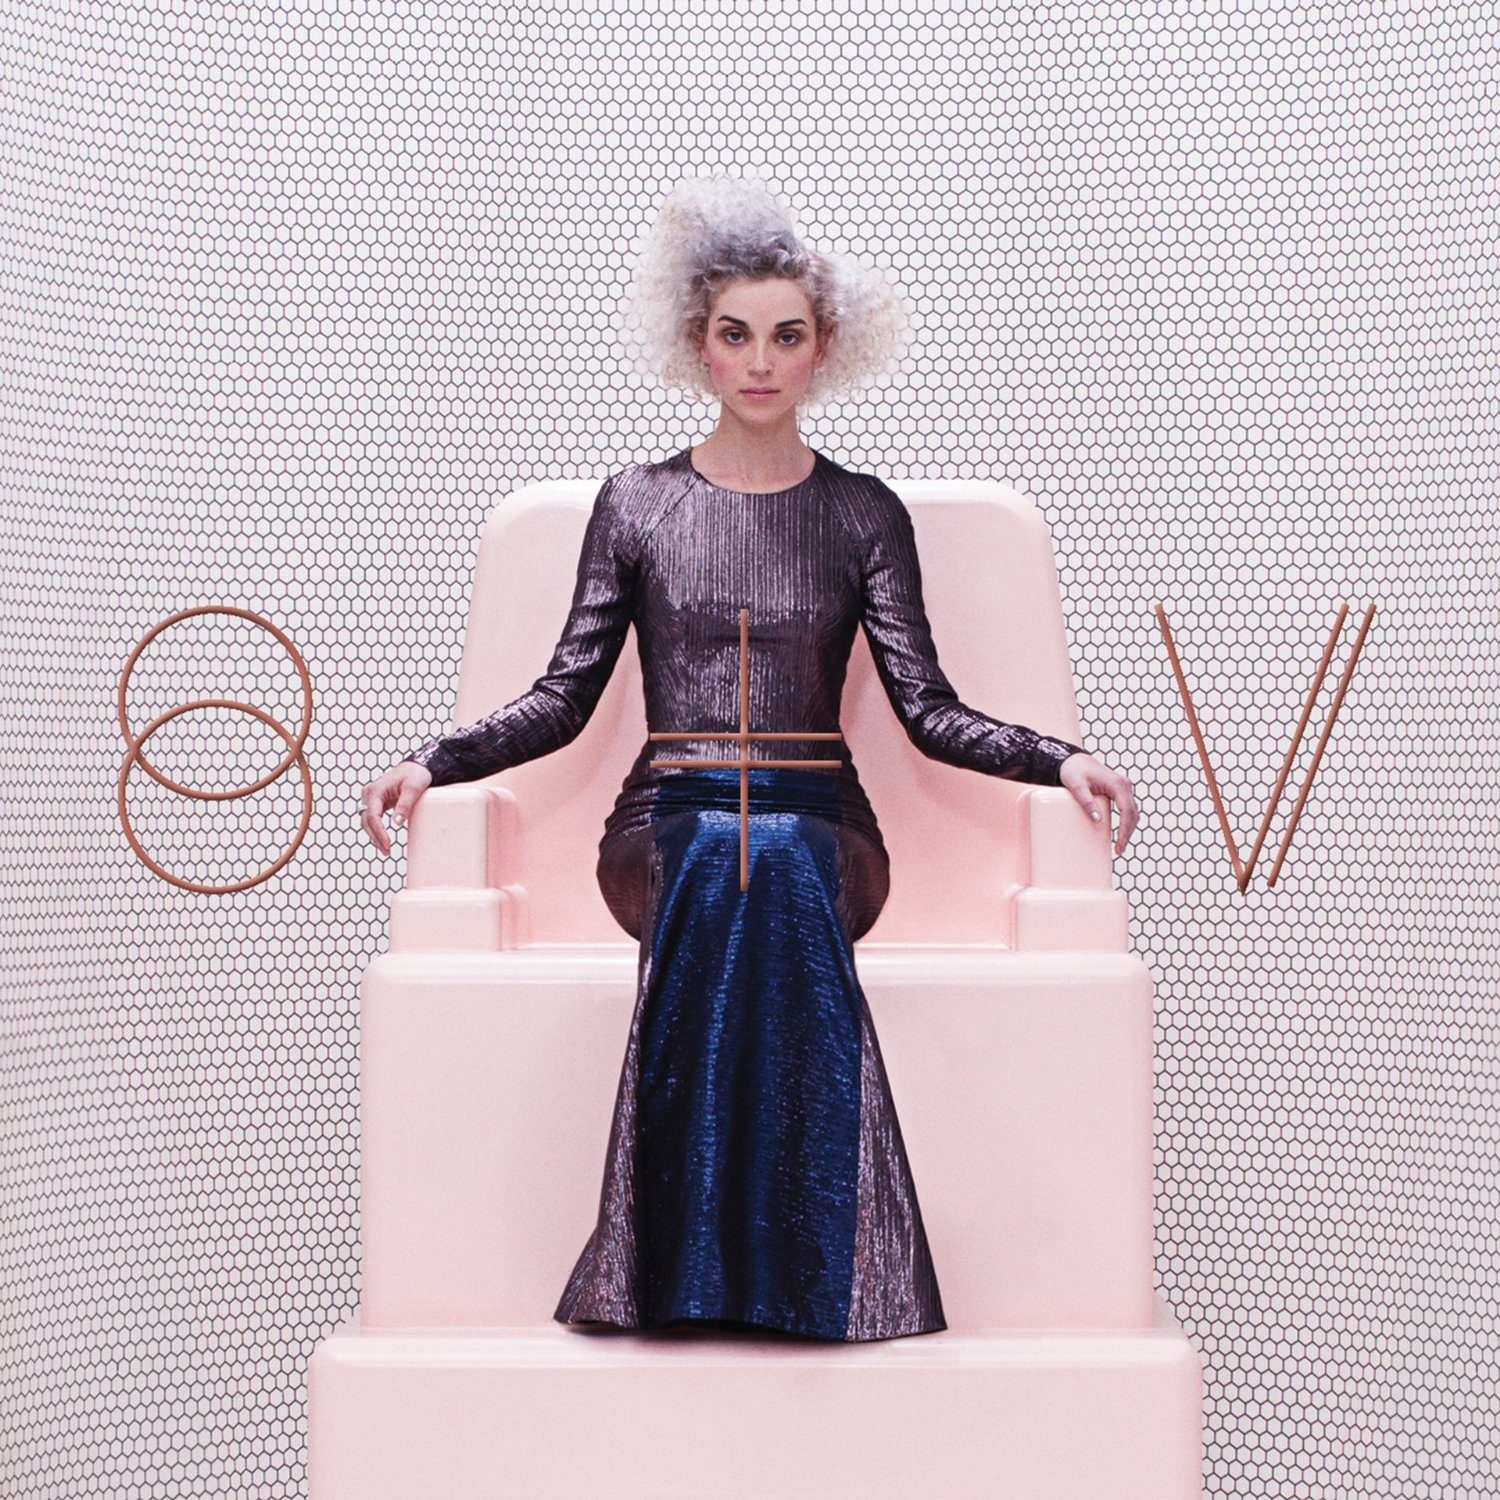 St. Vincent, Jack White and Tenacious D Take Home Awards at the 2015 Grammys